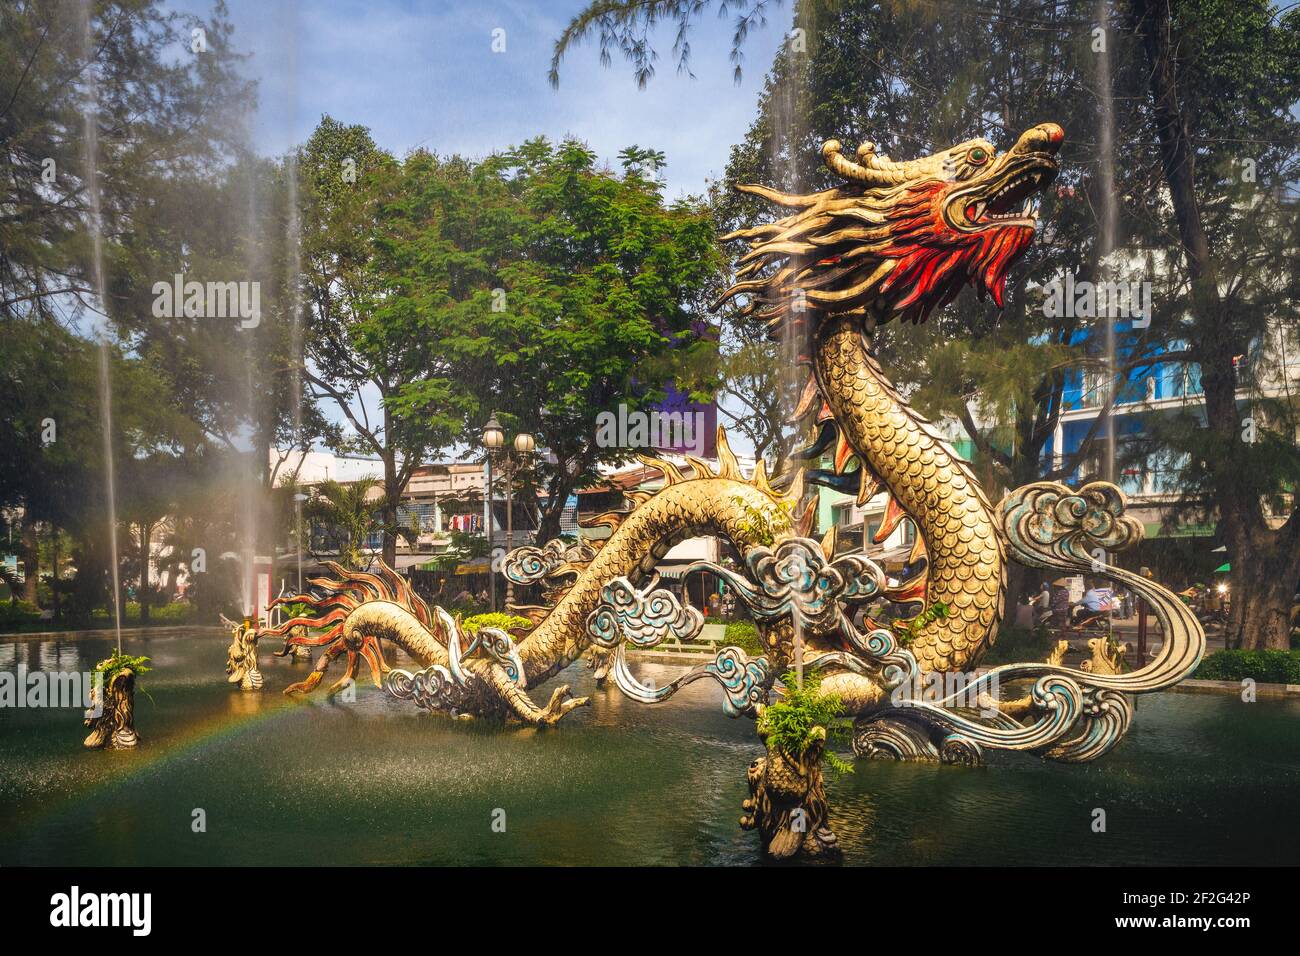 Dragon sculpture in Chinatown of Ho Chi Minh, Vietnam Stock Photo